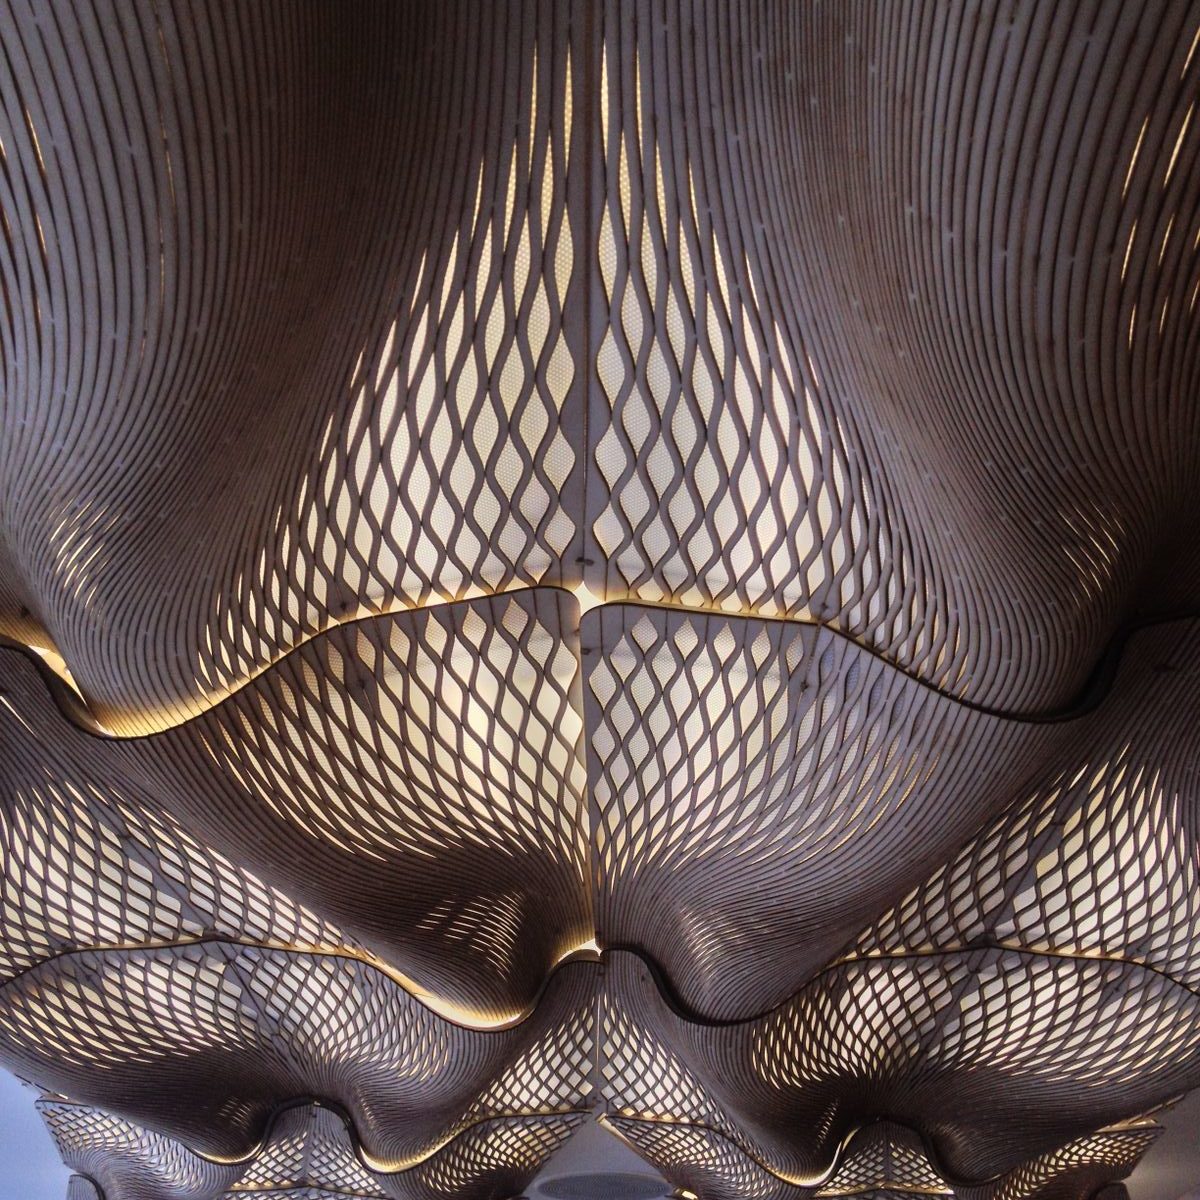 TheWoodenWaves at BuroHappold by Mamou-Mani - Picture by Lorenzo Vianelli